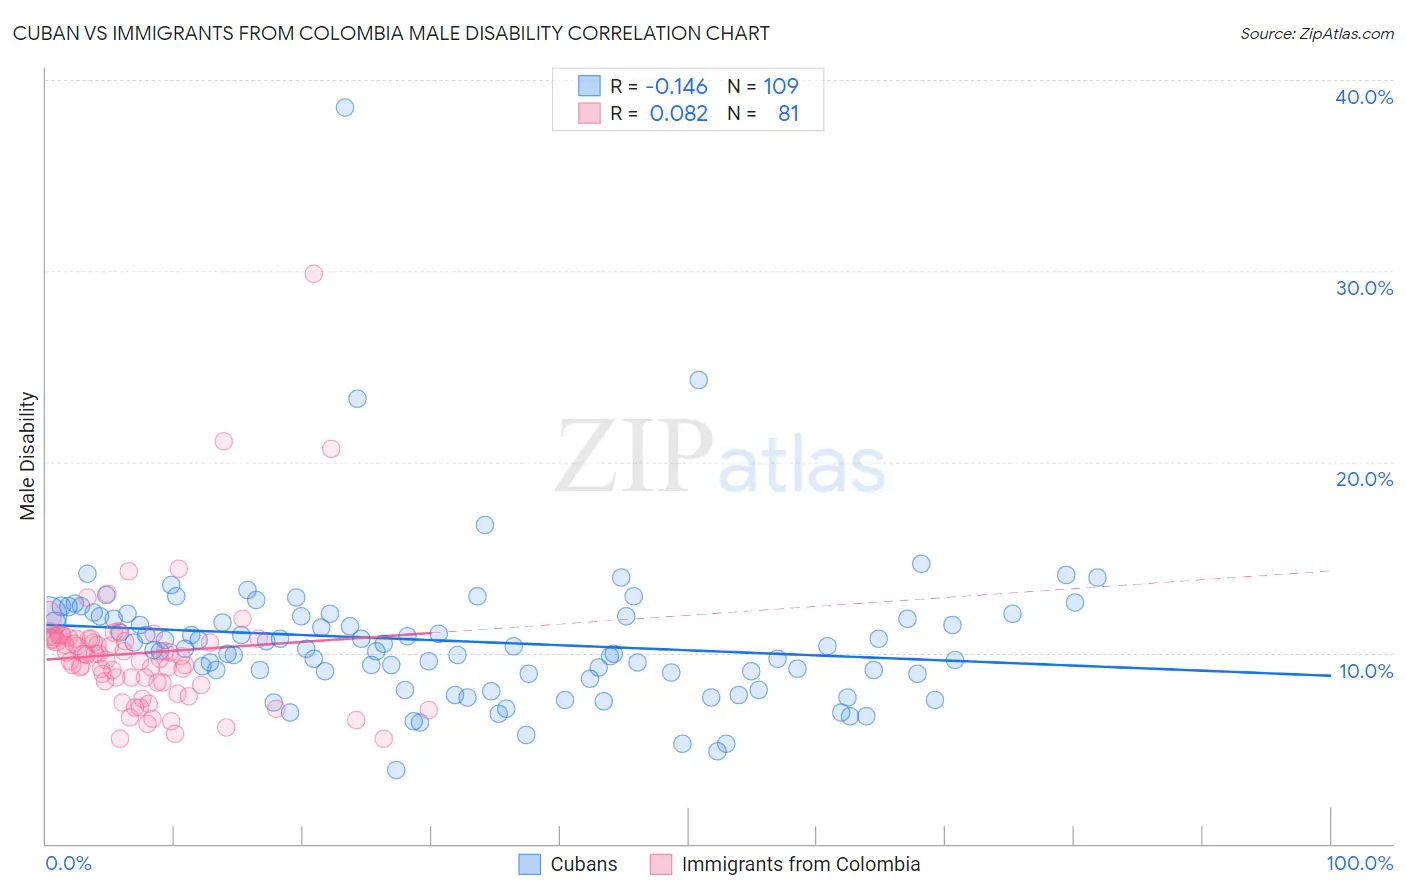 Cuban vs Immigrants from Colombia Male Disability